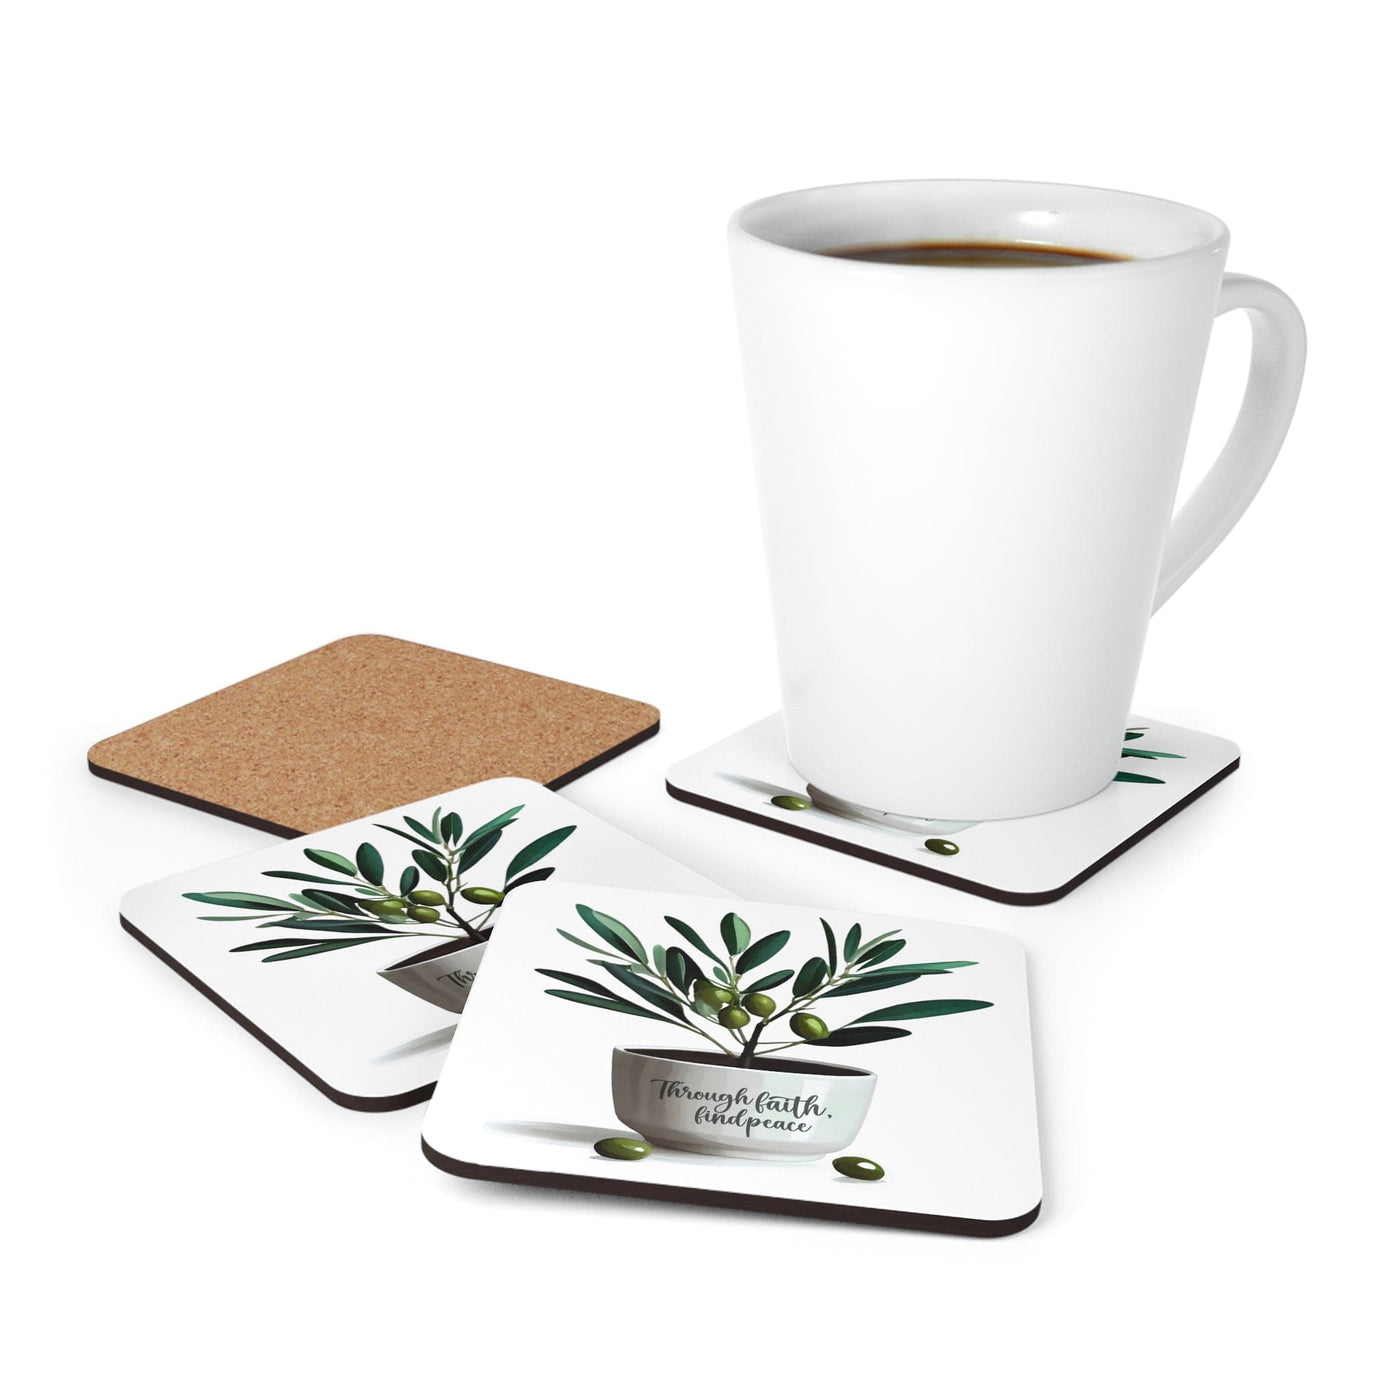 Handcrafted Square Coaster Set Of 4 For Drinks And Cups Through Faith Find